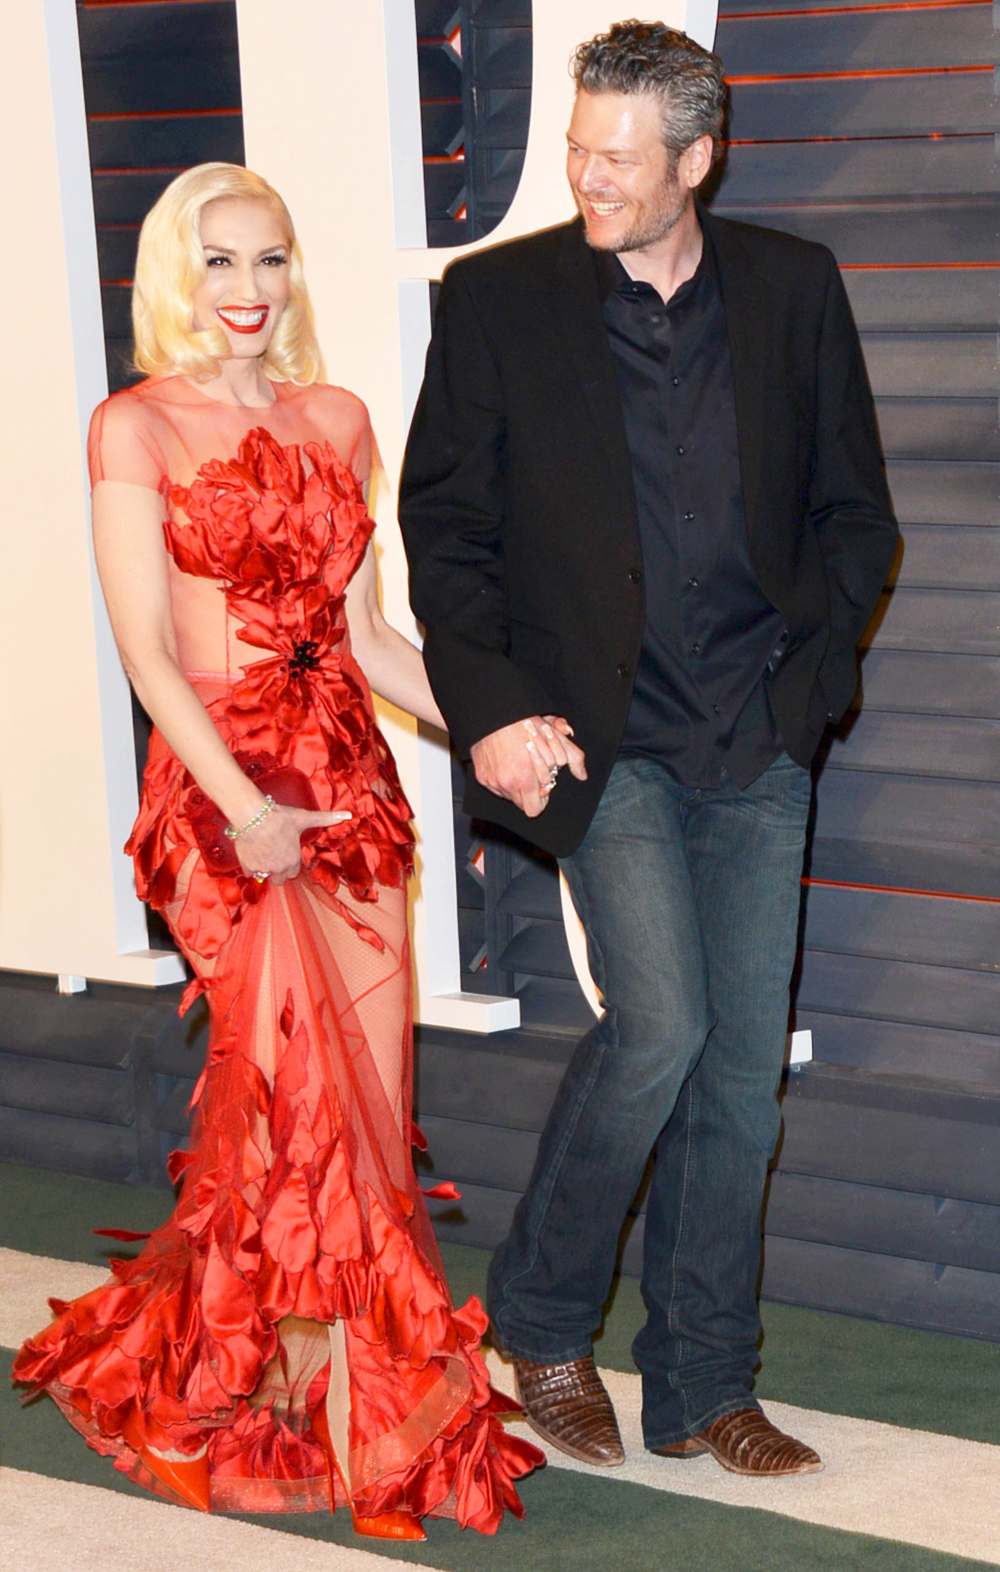 Gwen Stefani and Blake Shelton arrive at the 2016 Vanity Fair Oscar Party Hosted By Graydon Carter at Wallis Annenberg Center for the Performing Arts in Beverly Hills, California.